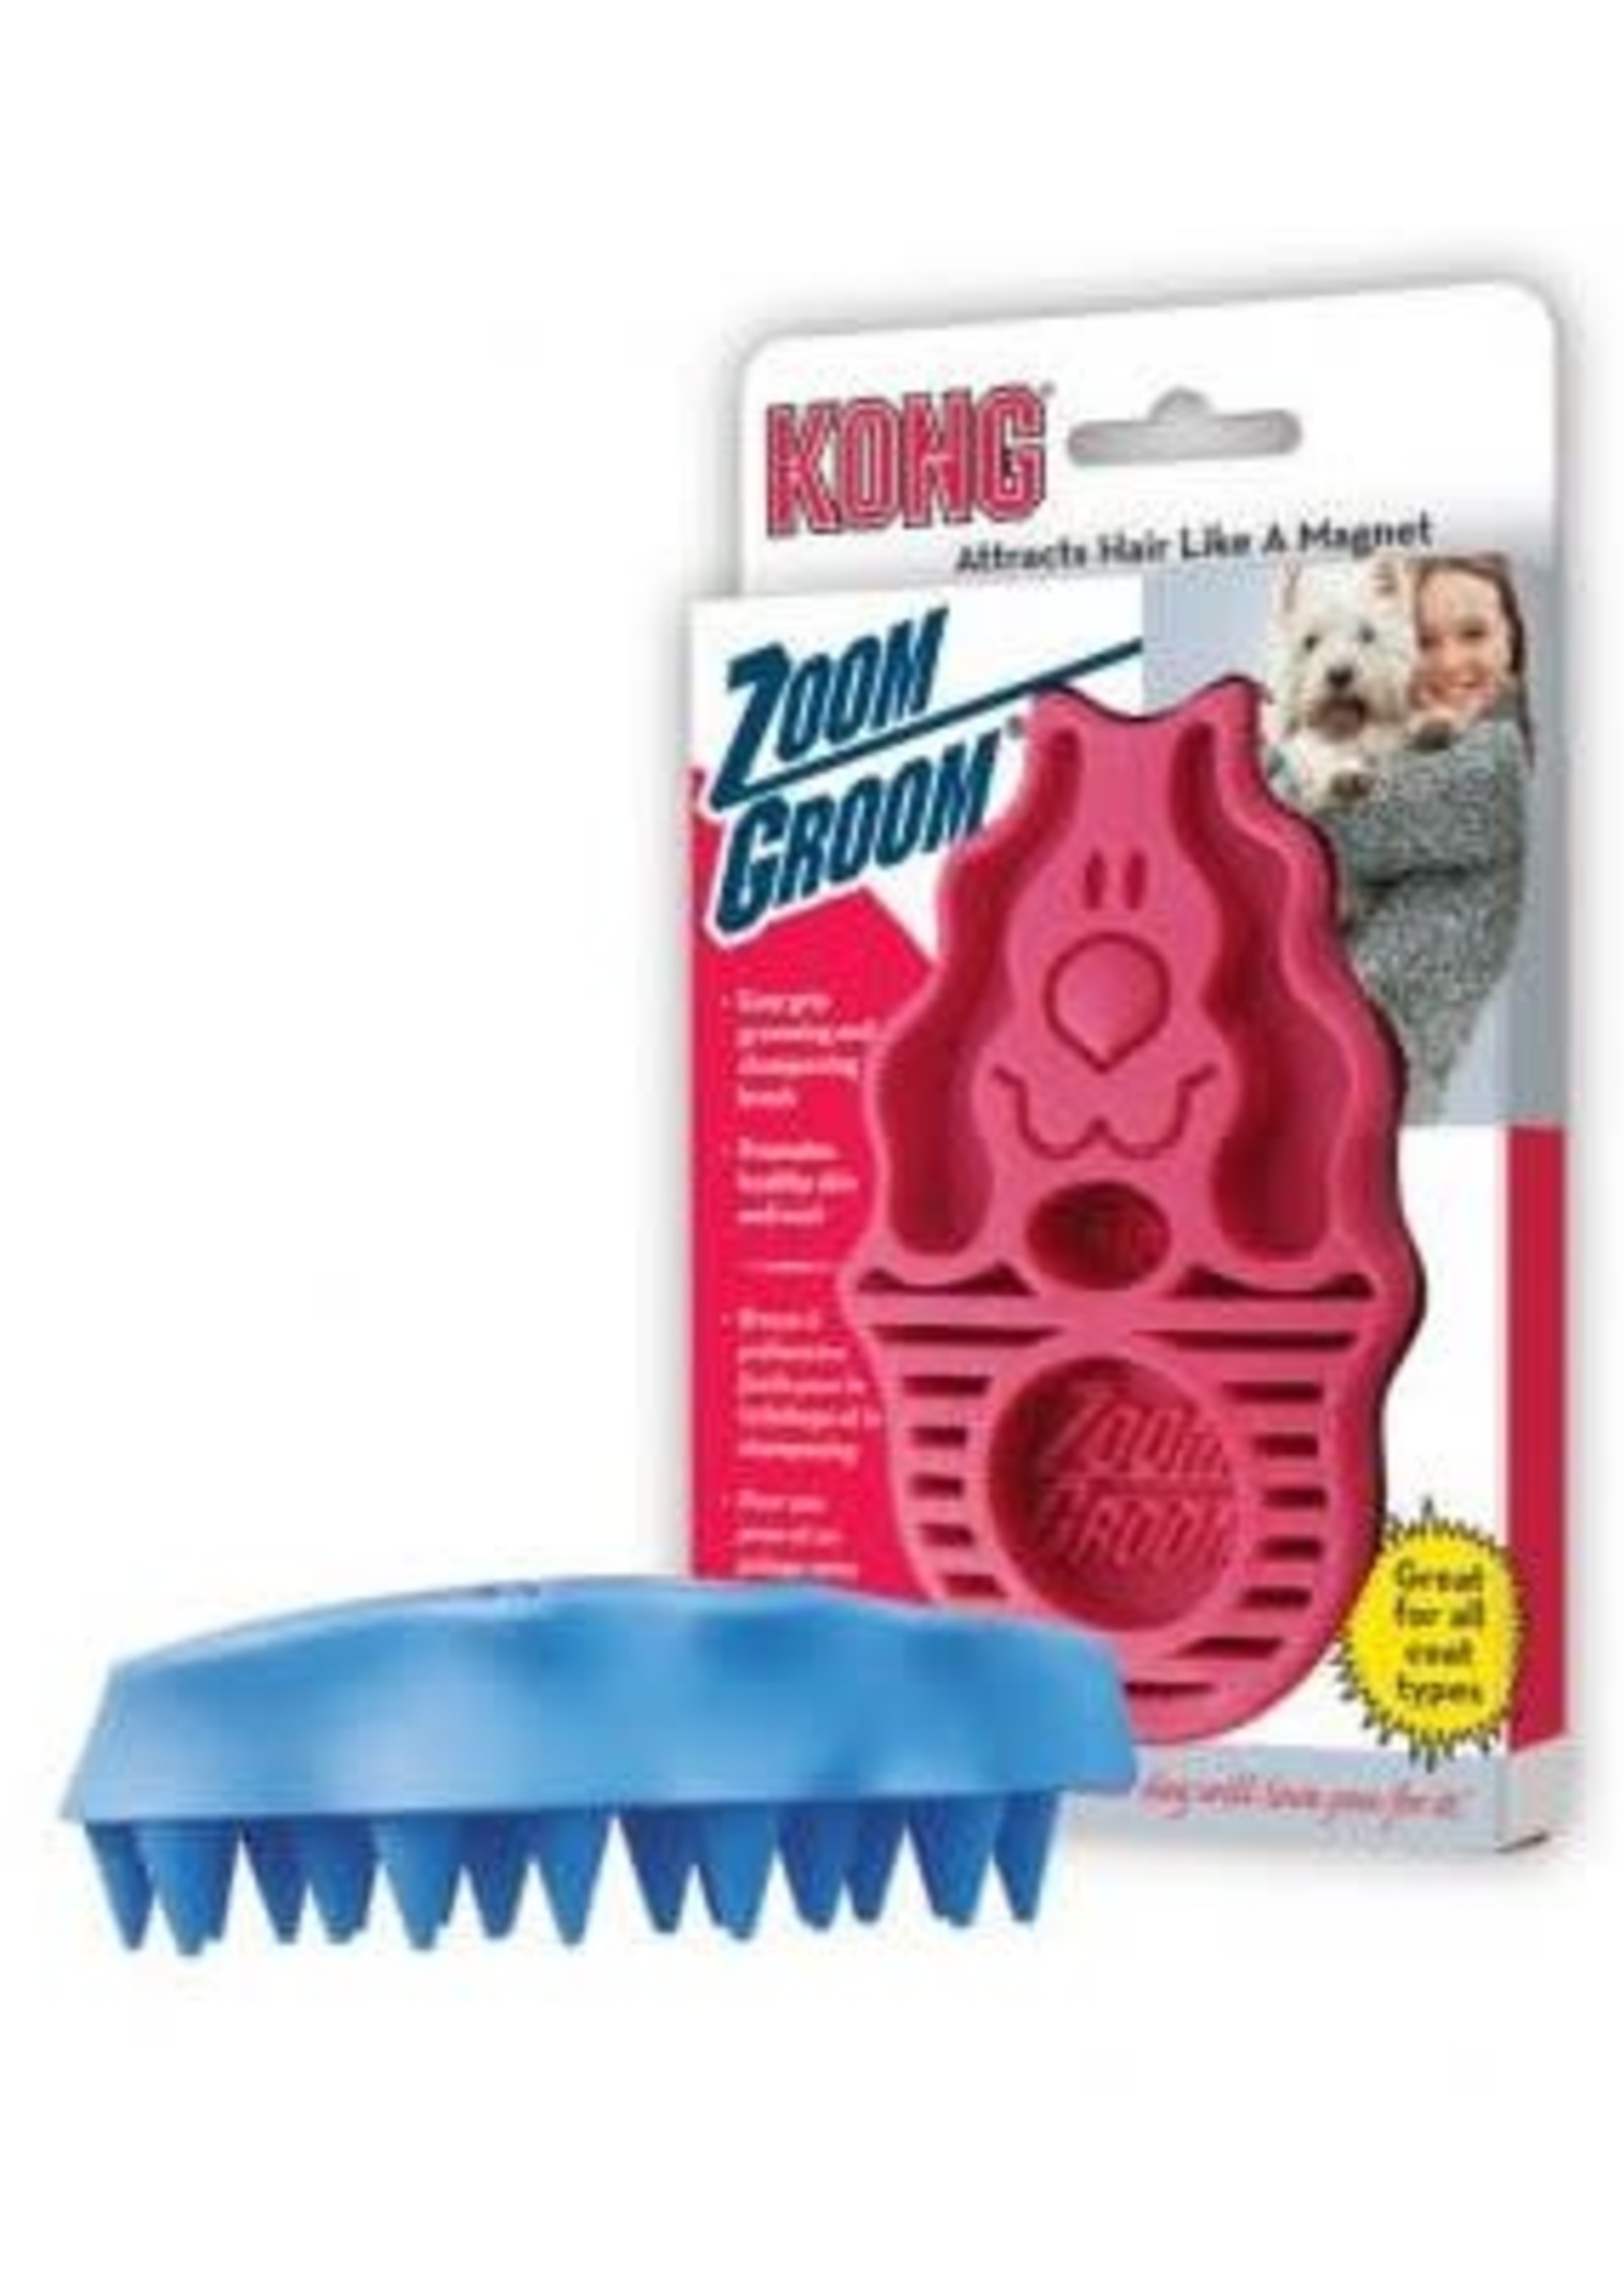 Kong® Kong Zoom Groom Boysenberry for Dogs & Cats (Blue)